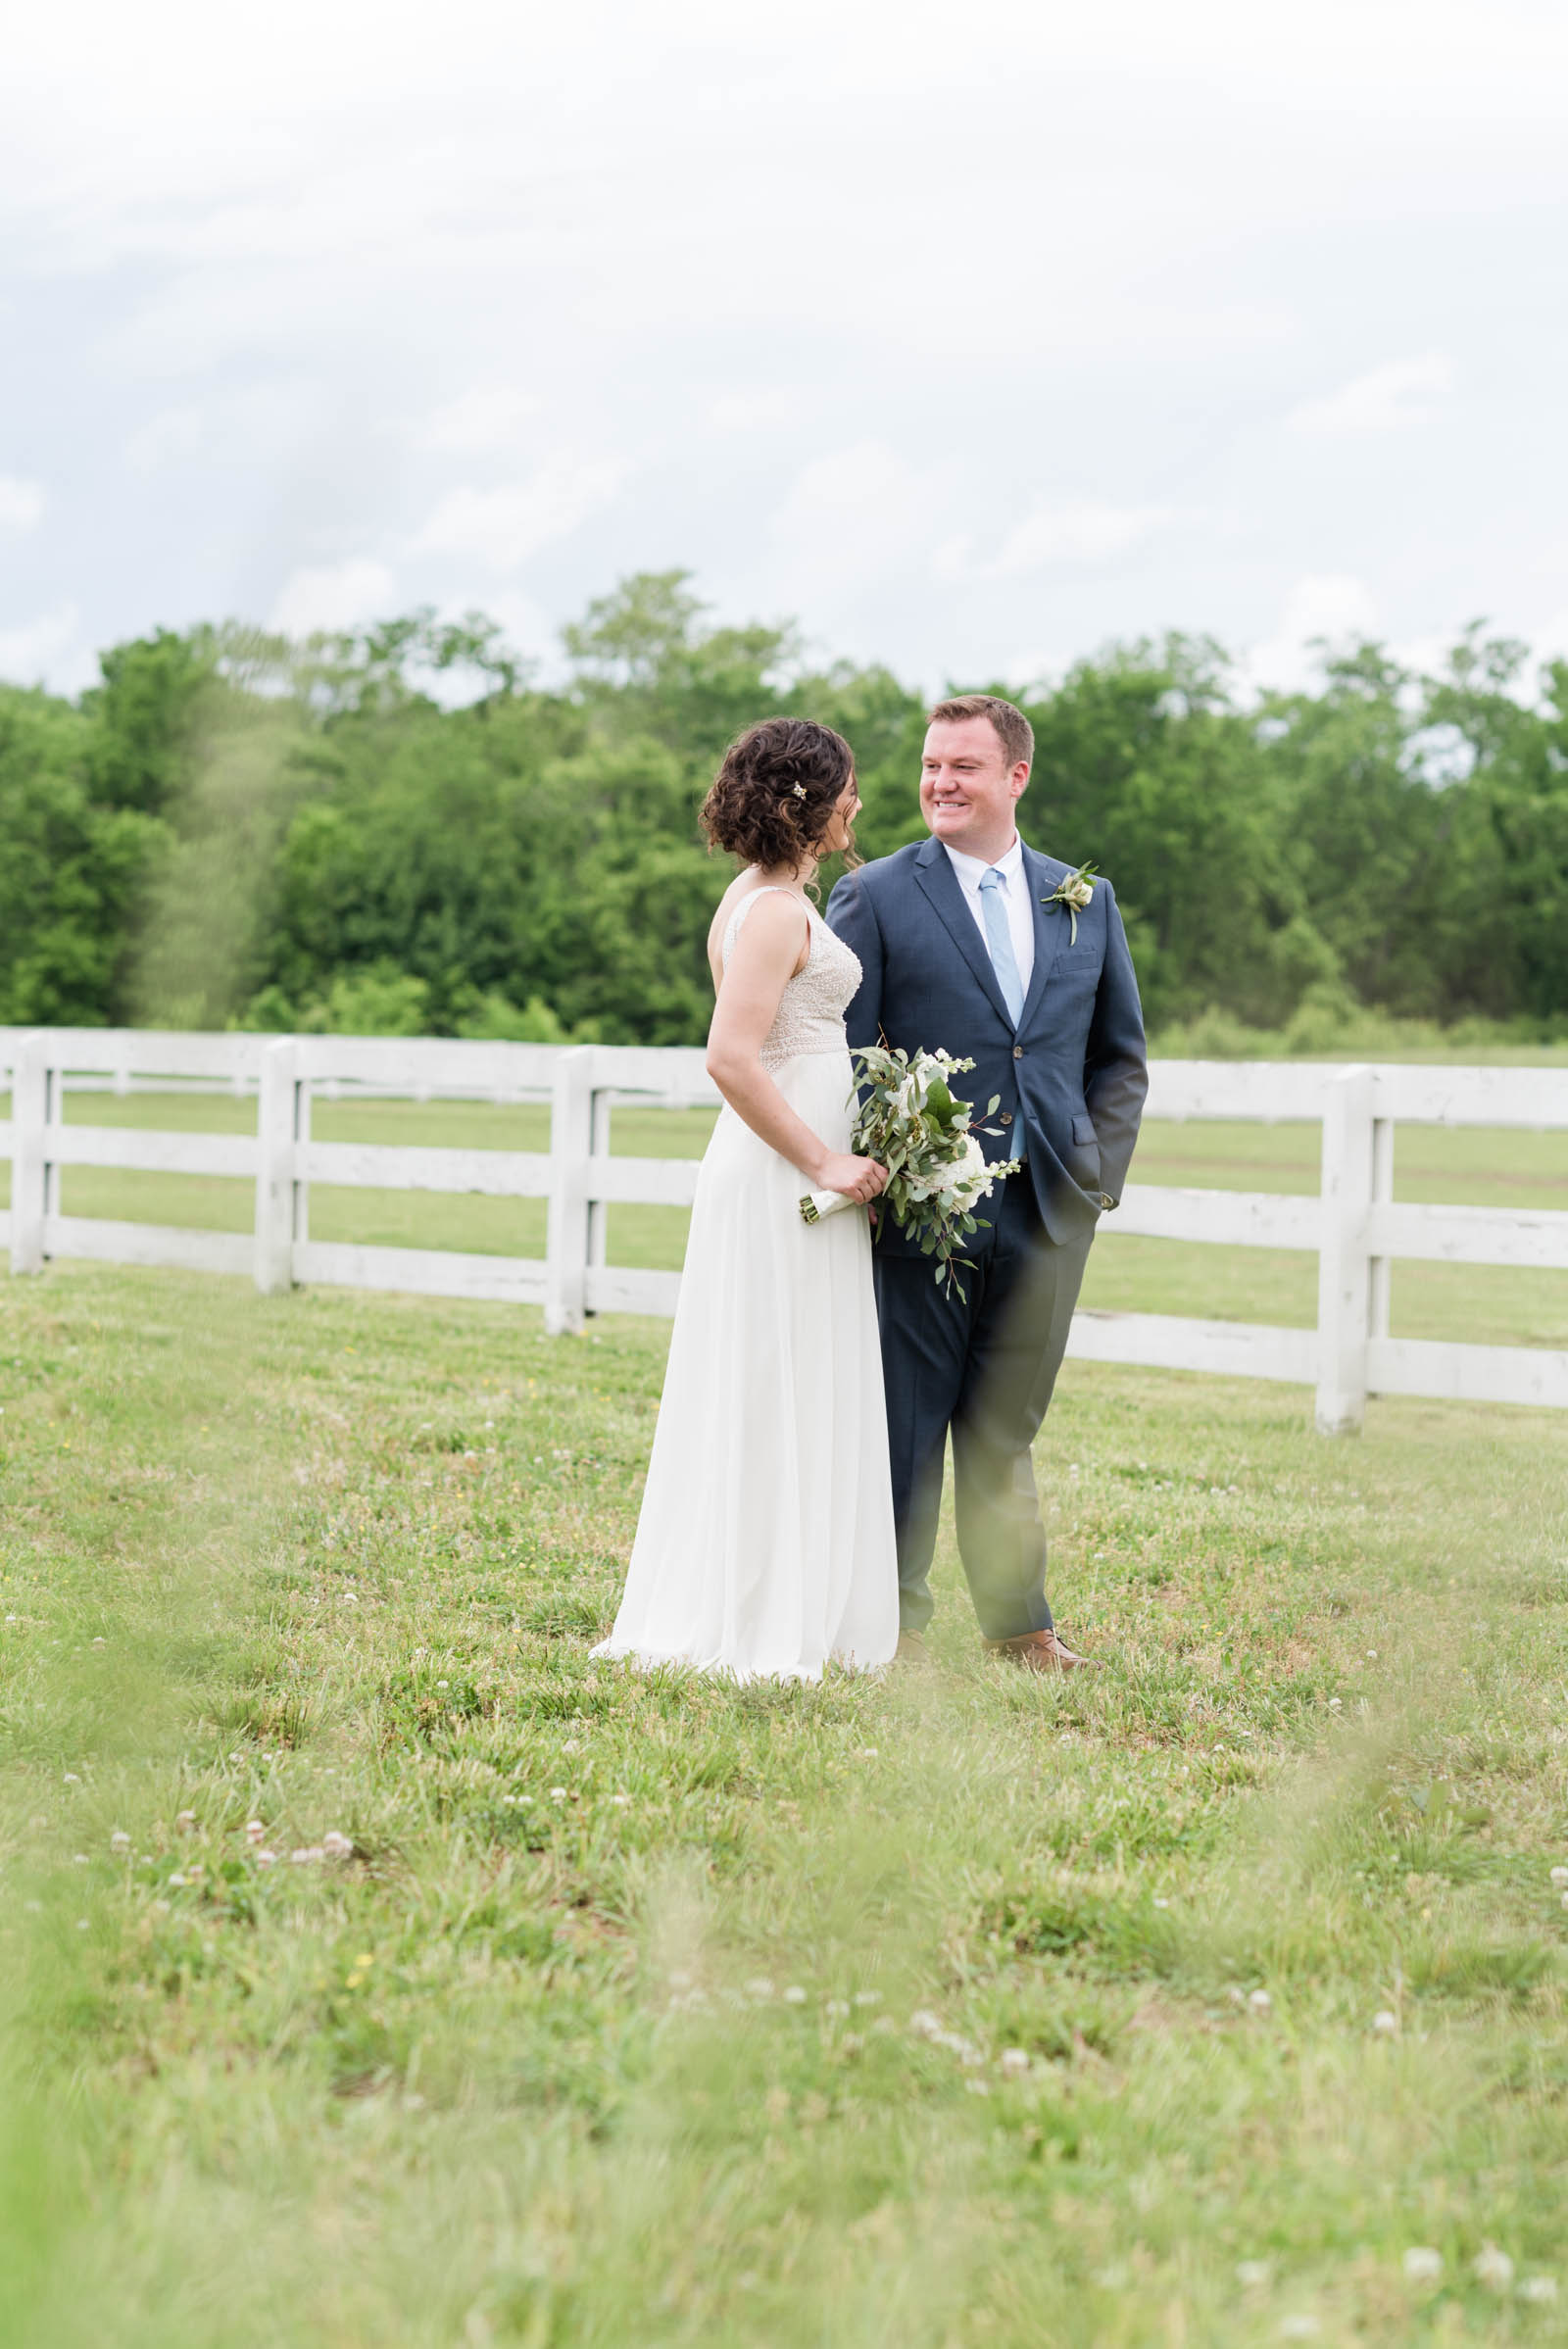 Wedding at The Park at Harlinsdale Farm & Westhaven Golf Club Nashville Tennessee